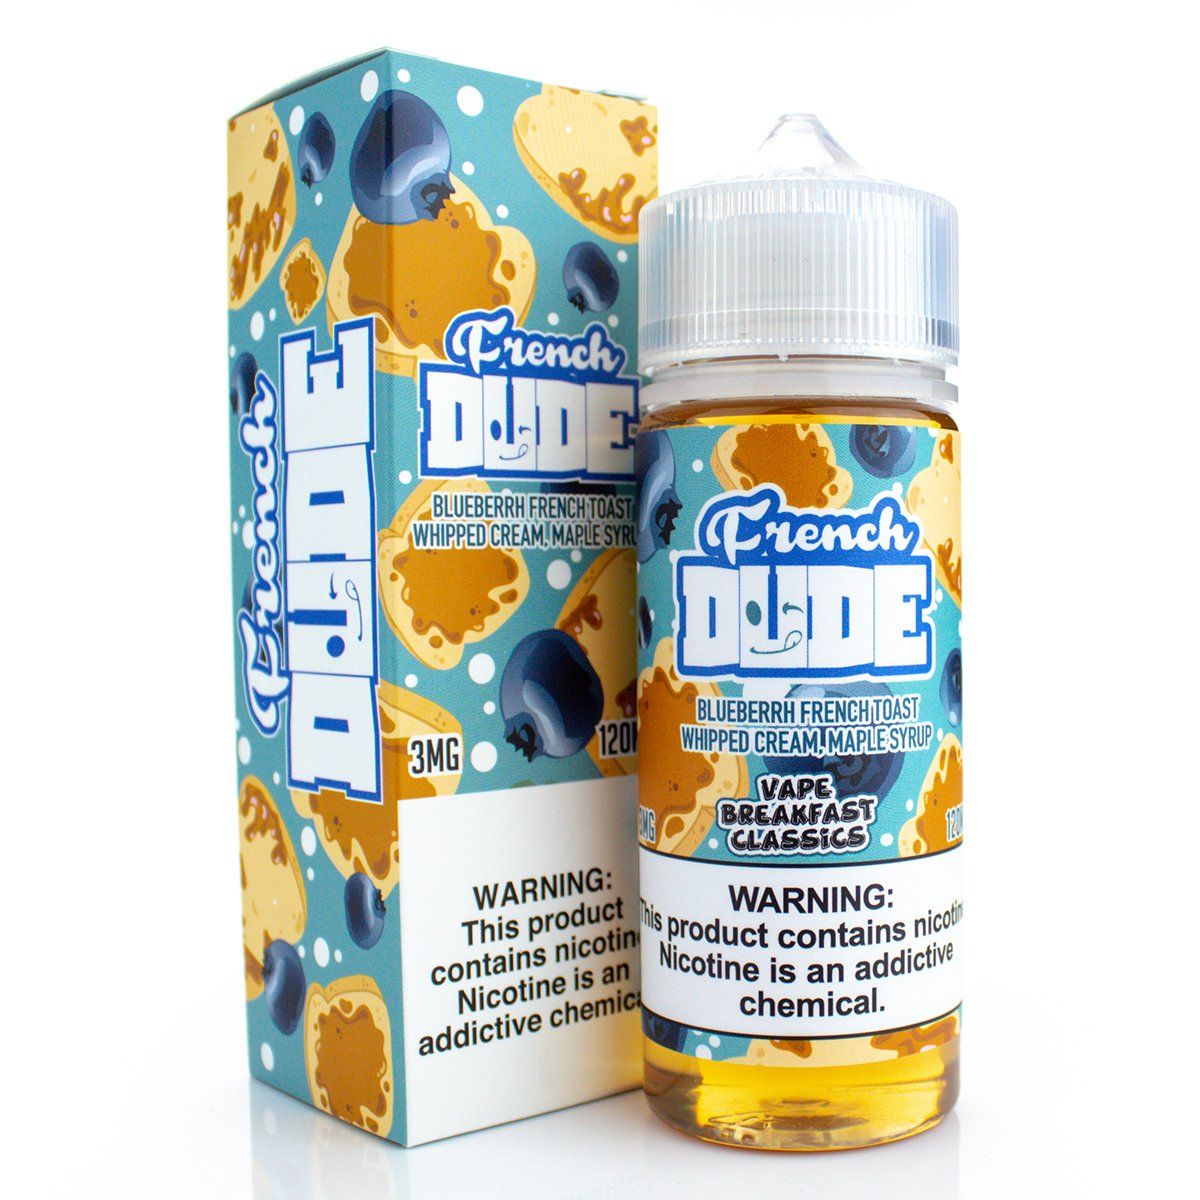 French Dude by Vape Breakfast Classics 120ml with Packaging